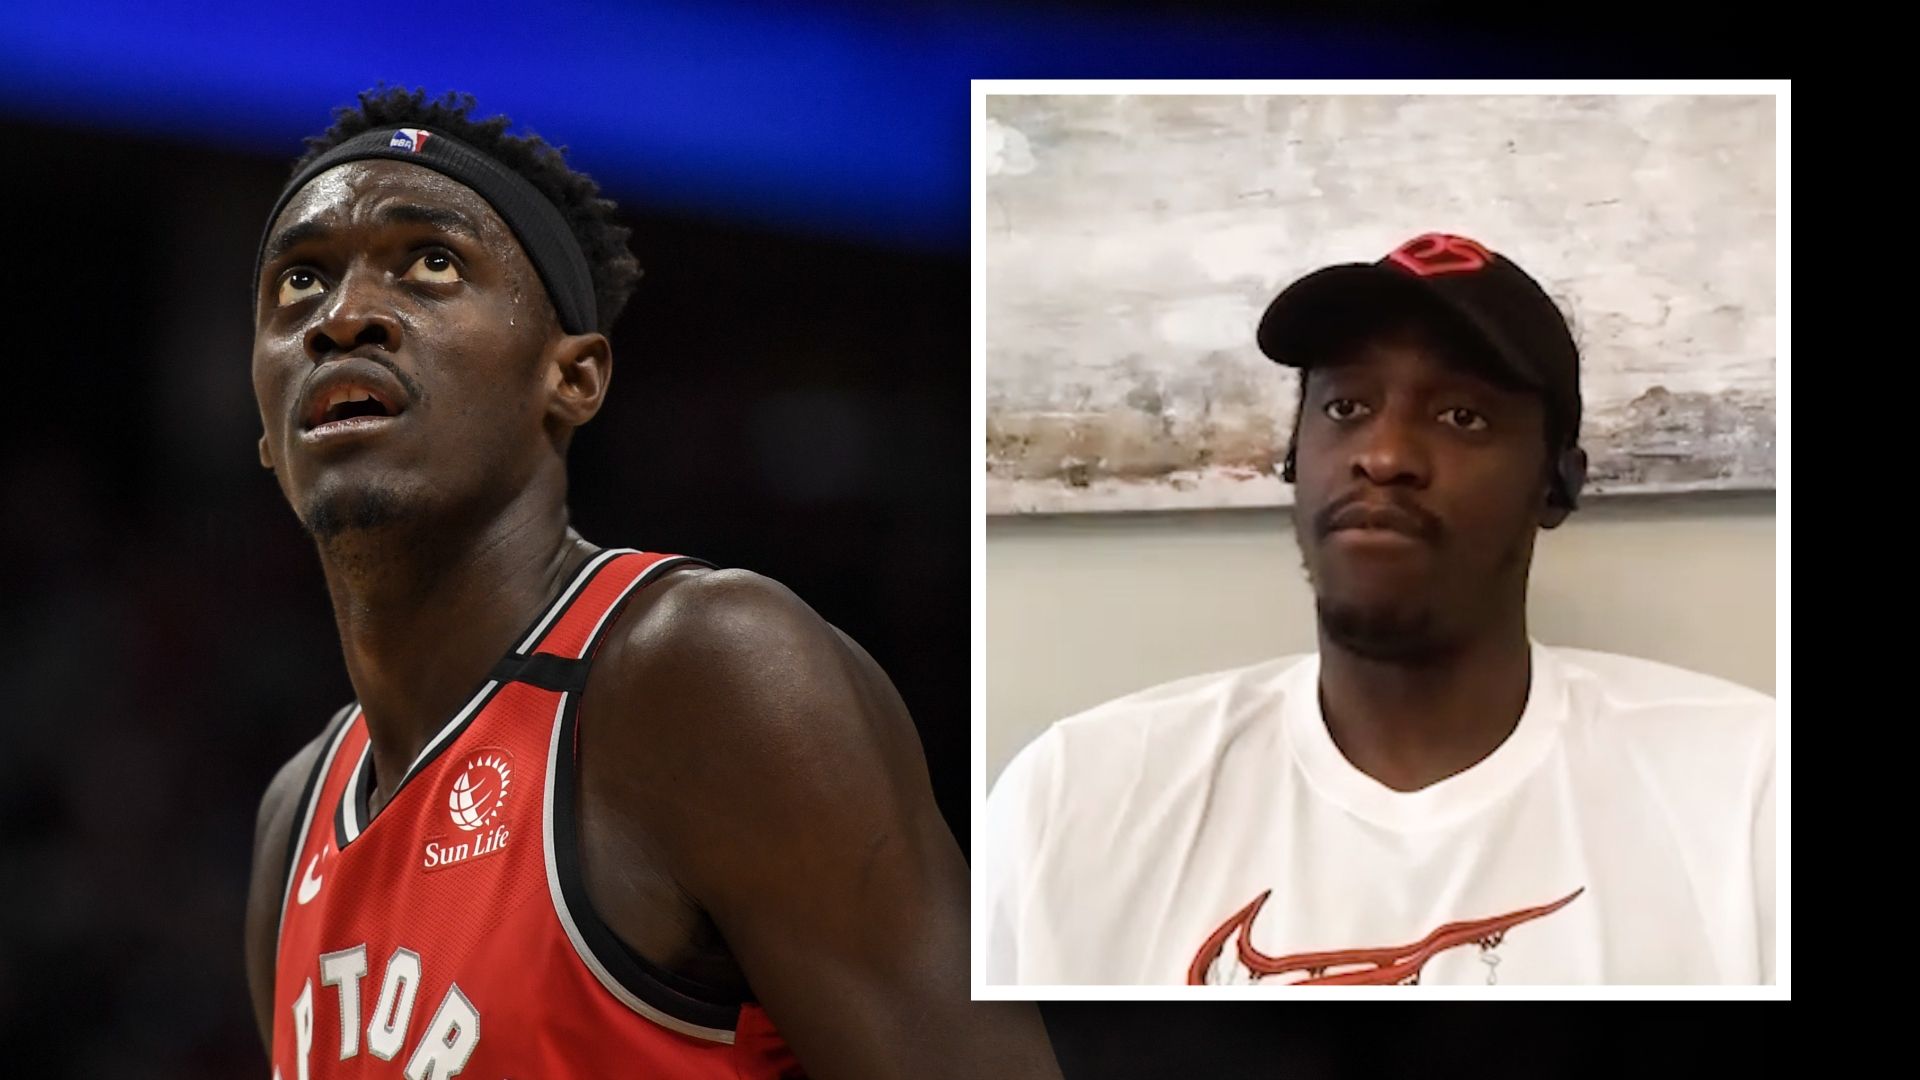 Pascal Siakam The time is now for change ESPN Video